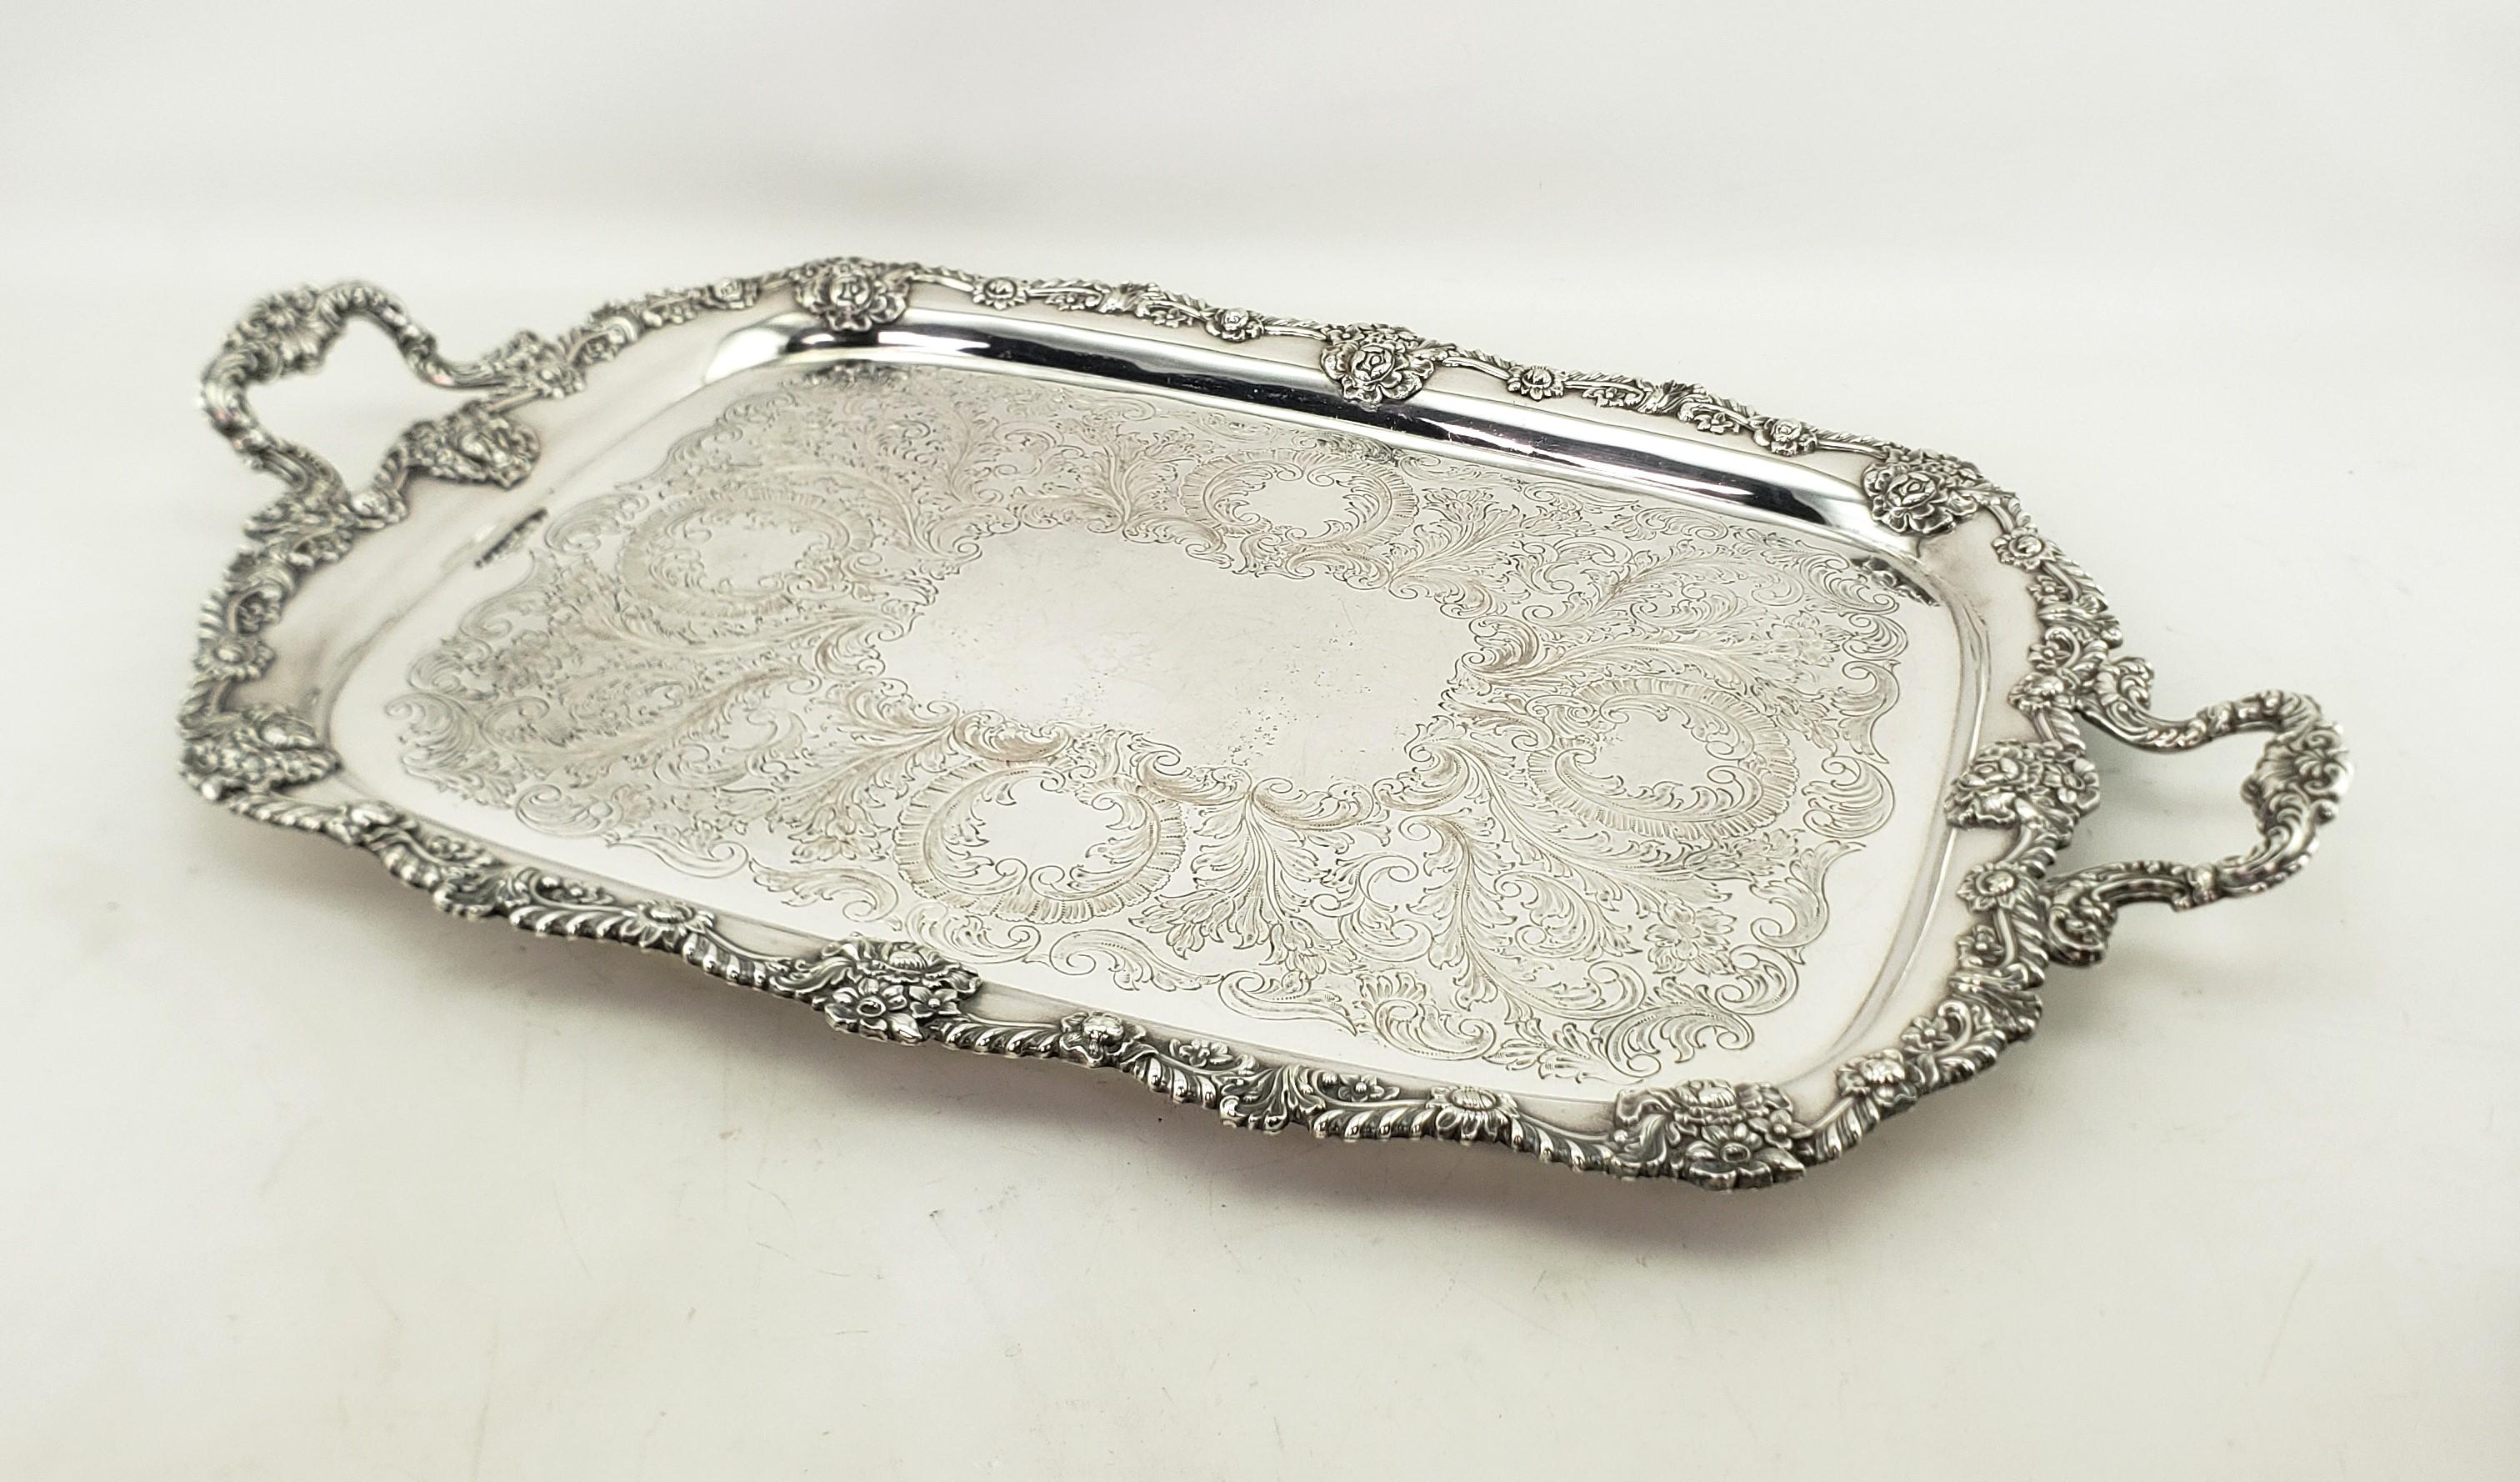 Victorian Large Antique English Silver Plated Serving Tray with Ornate Floral Decoration For Sale